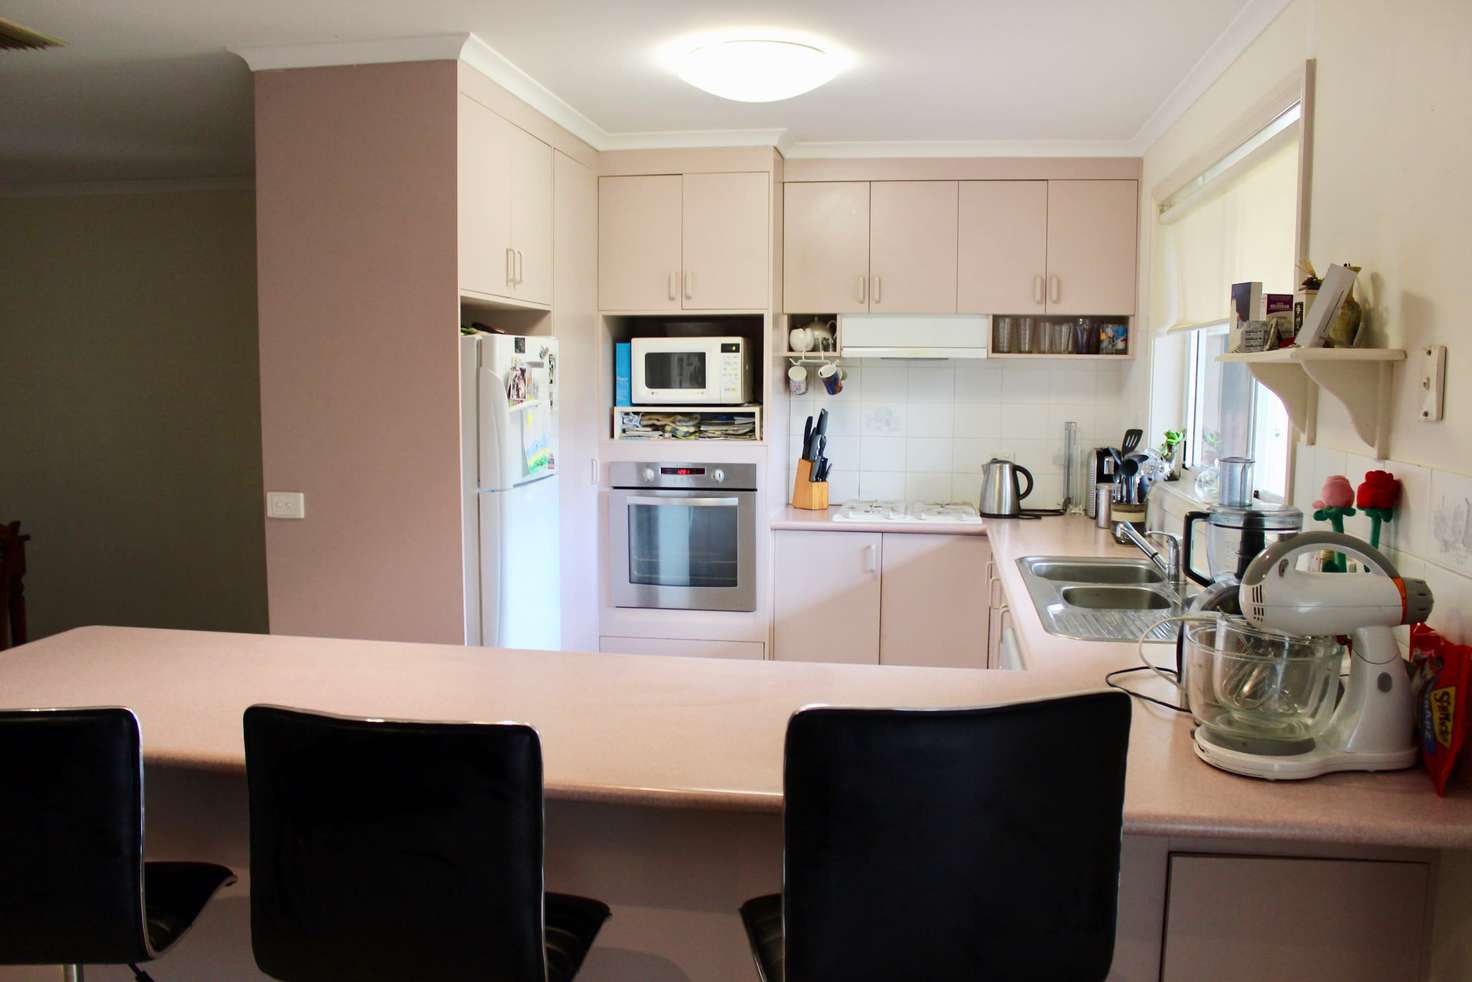 Main view of Homely house listing, 6 Park Place, Benalla VIC 3672